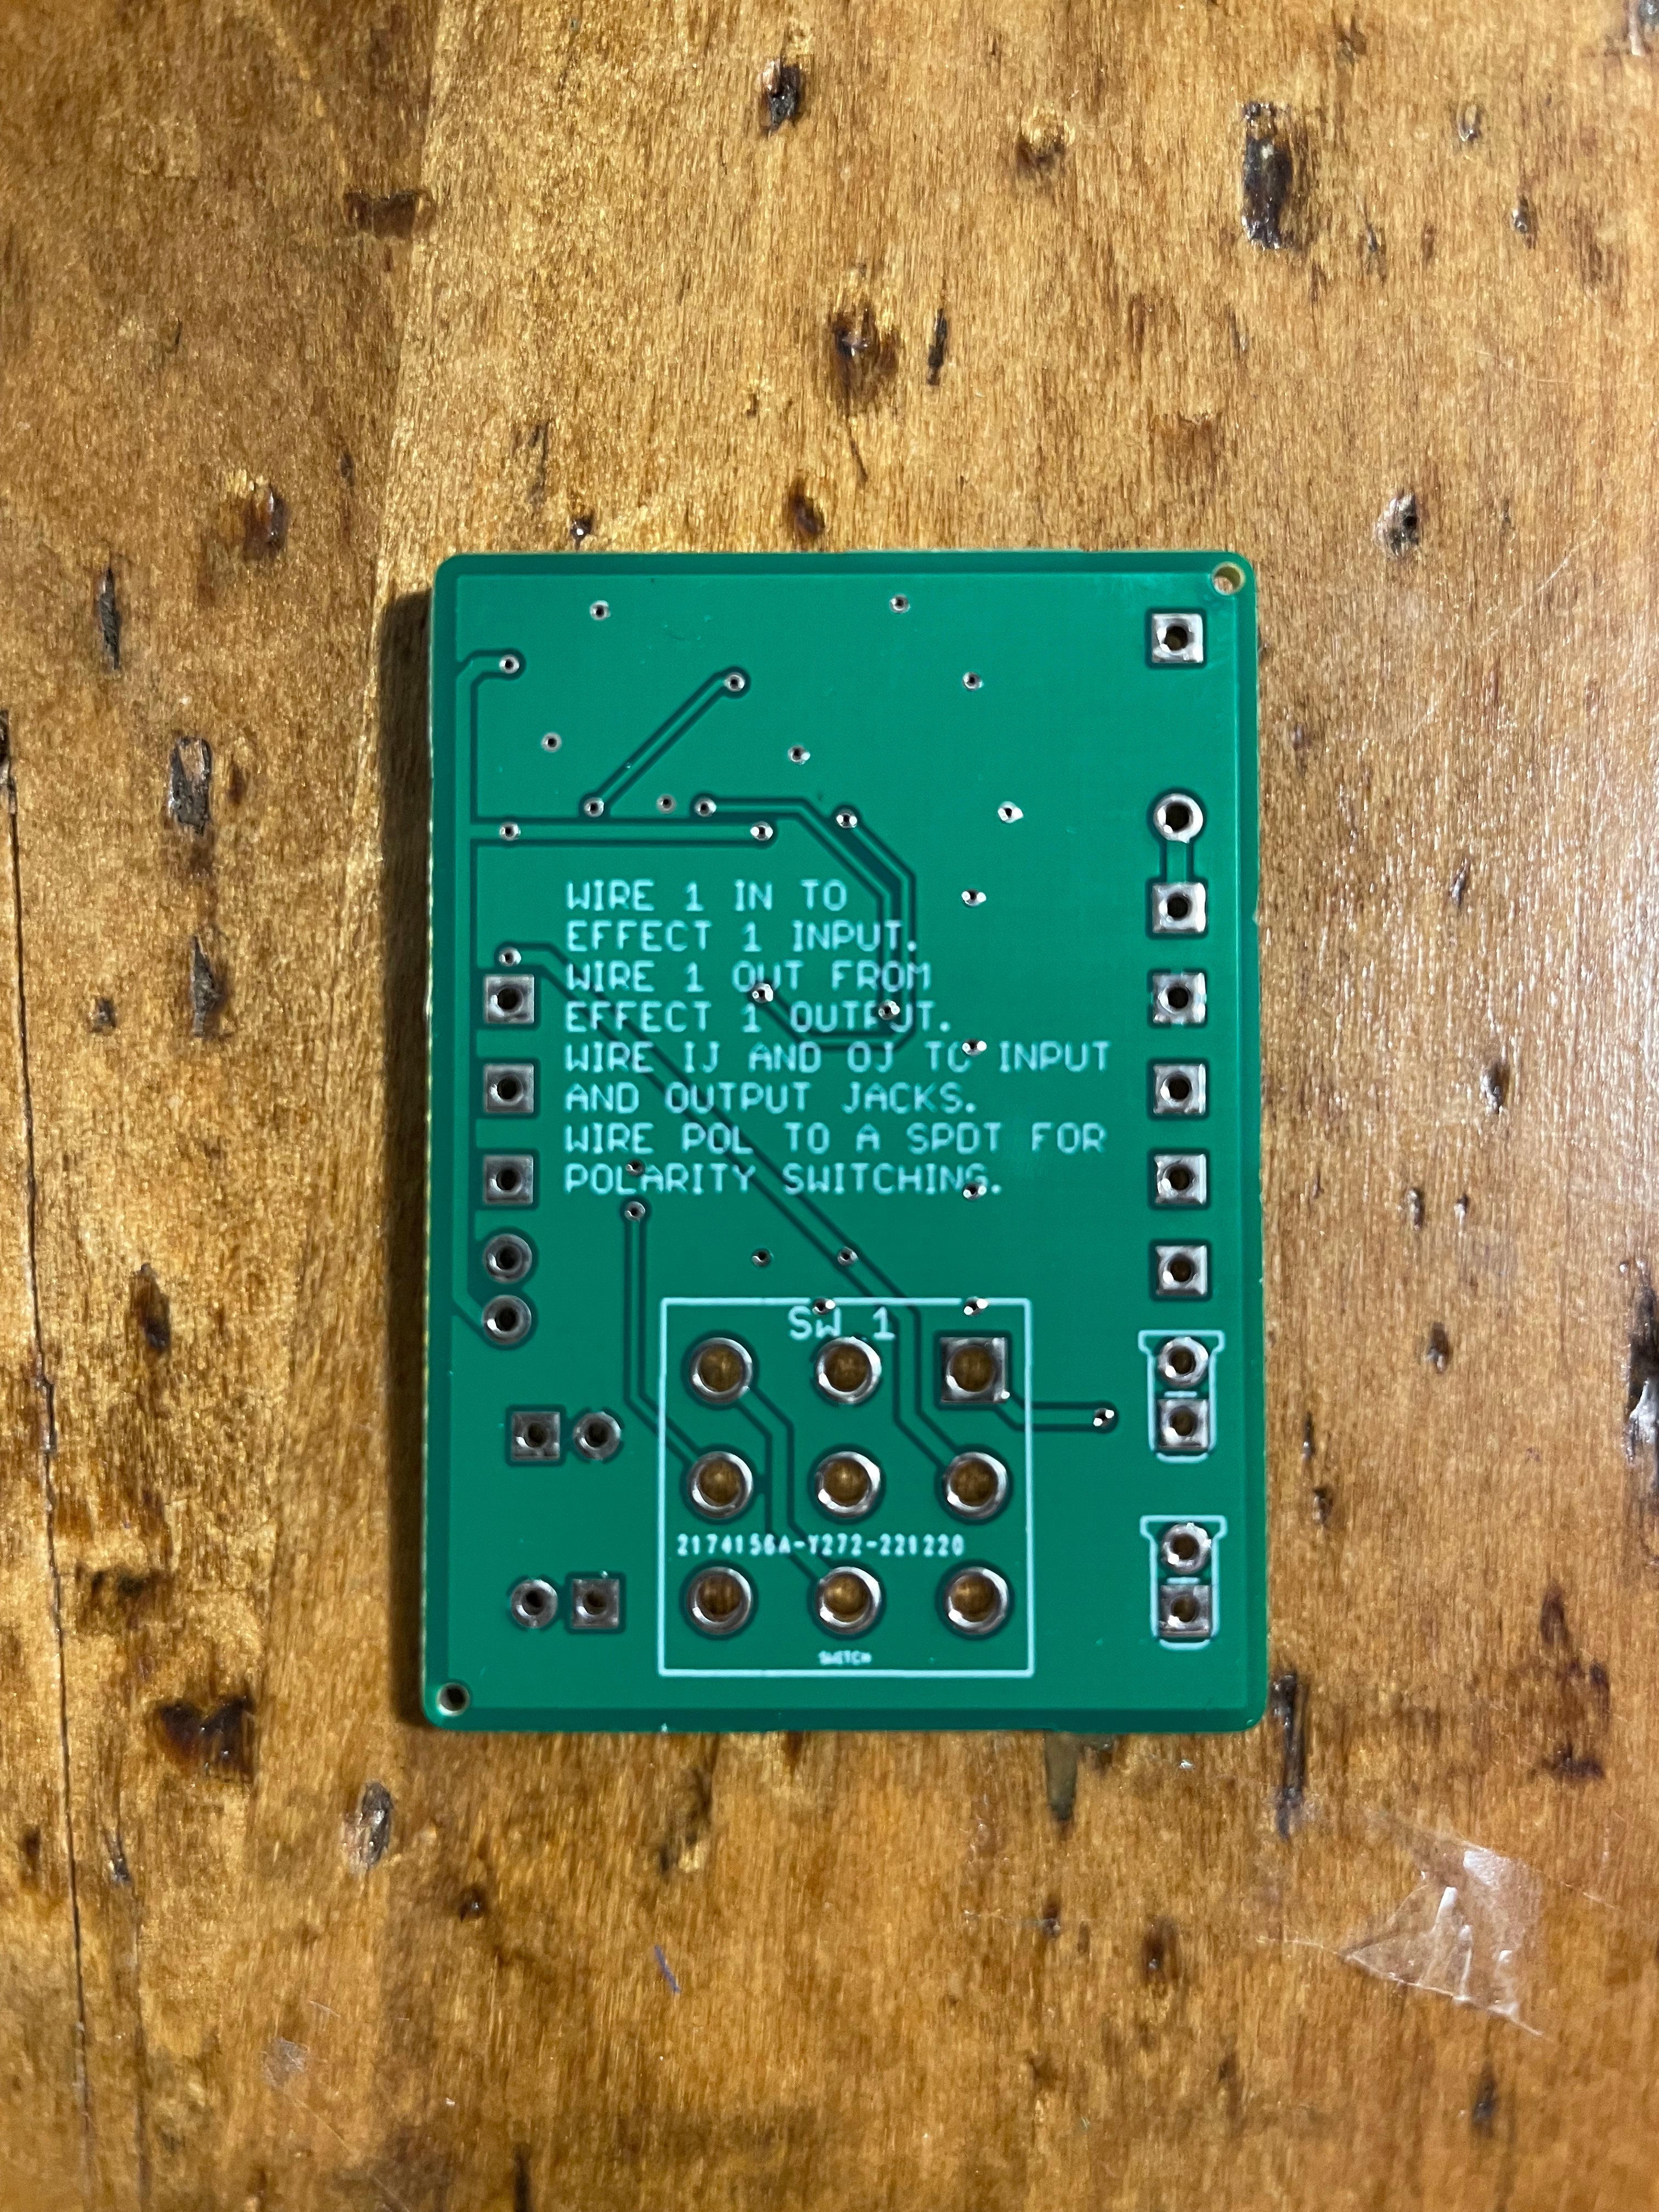 Series Parallel pre-populated DIY PCB